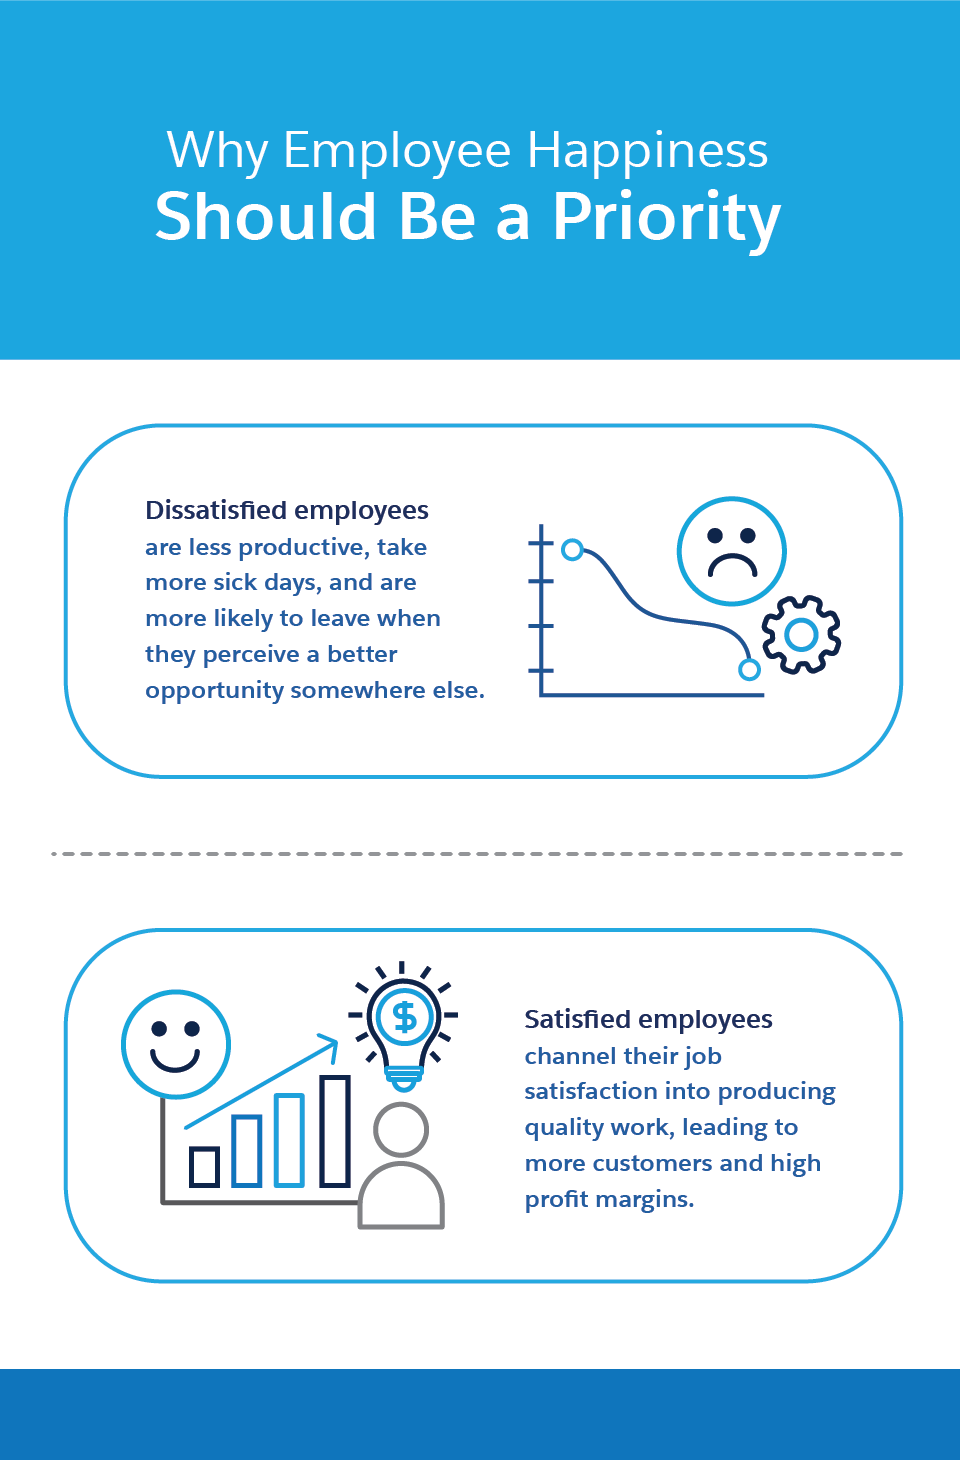 Happiness at work: How does your colleagues contribute?